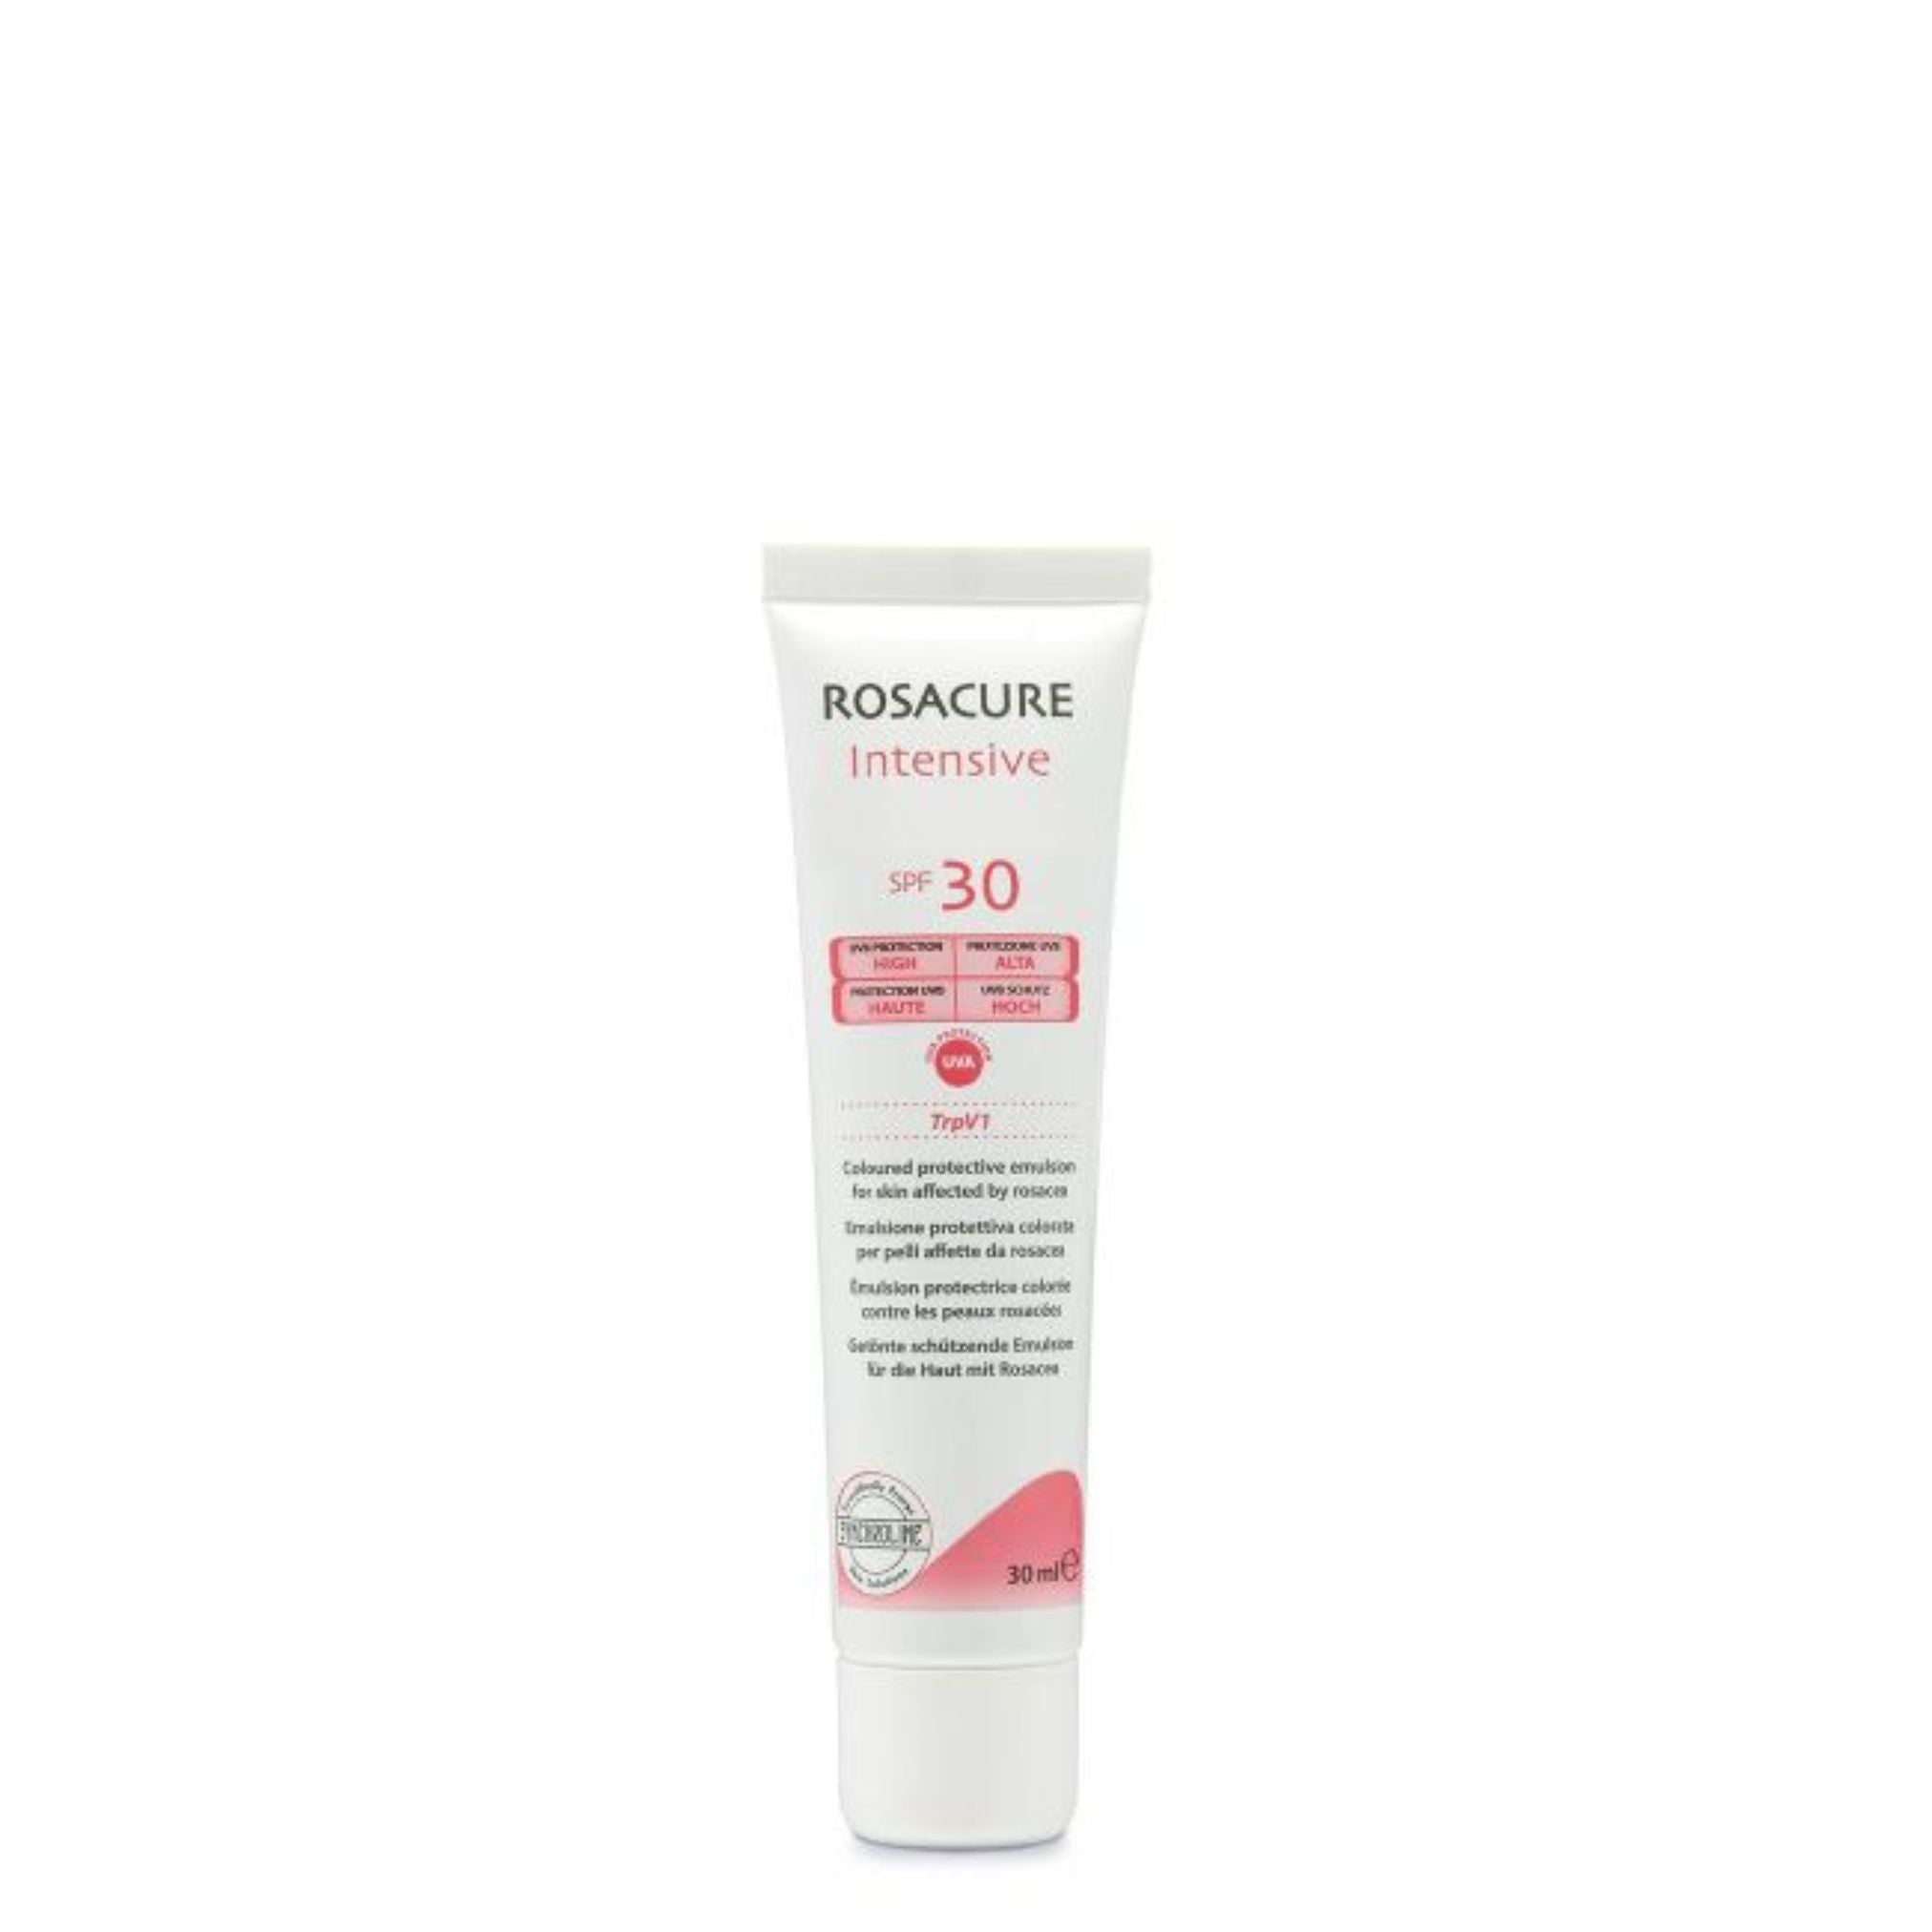 Rosacure Intensive Protective Emulsion SPF30 30ml